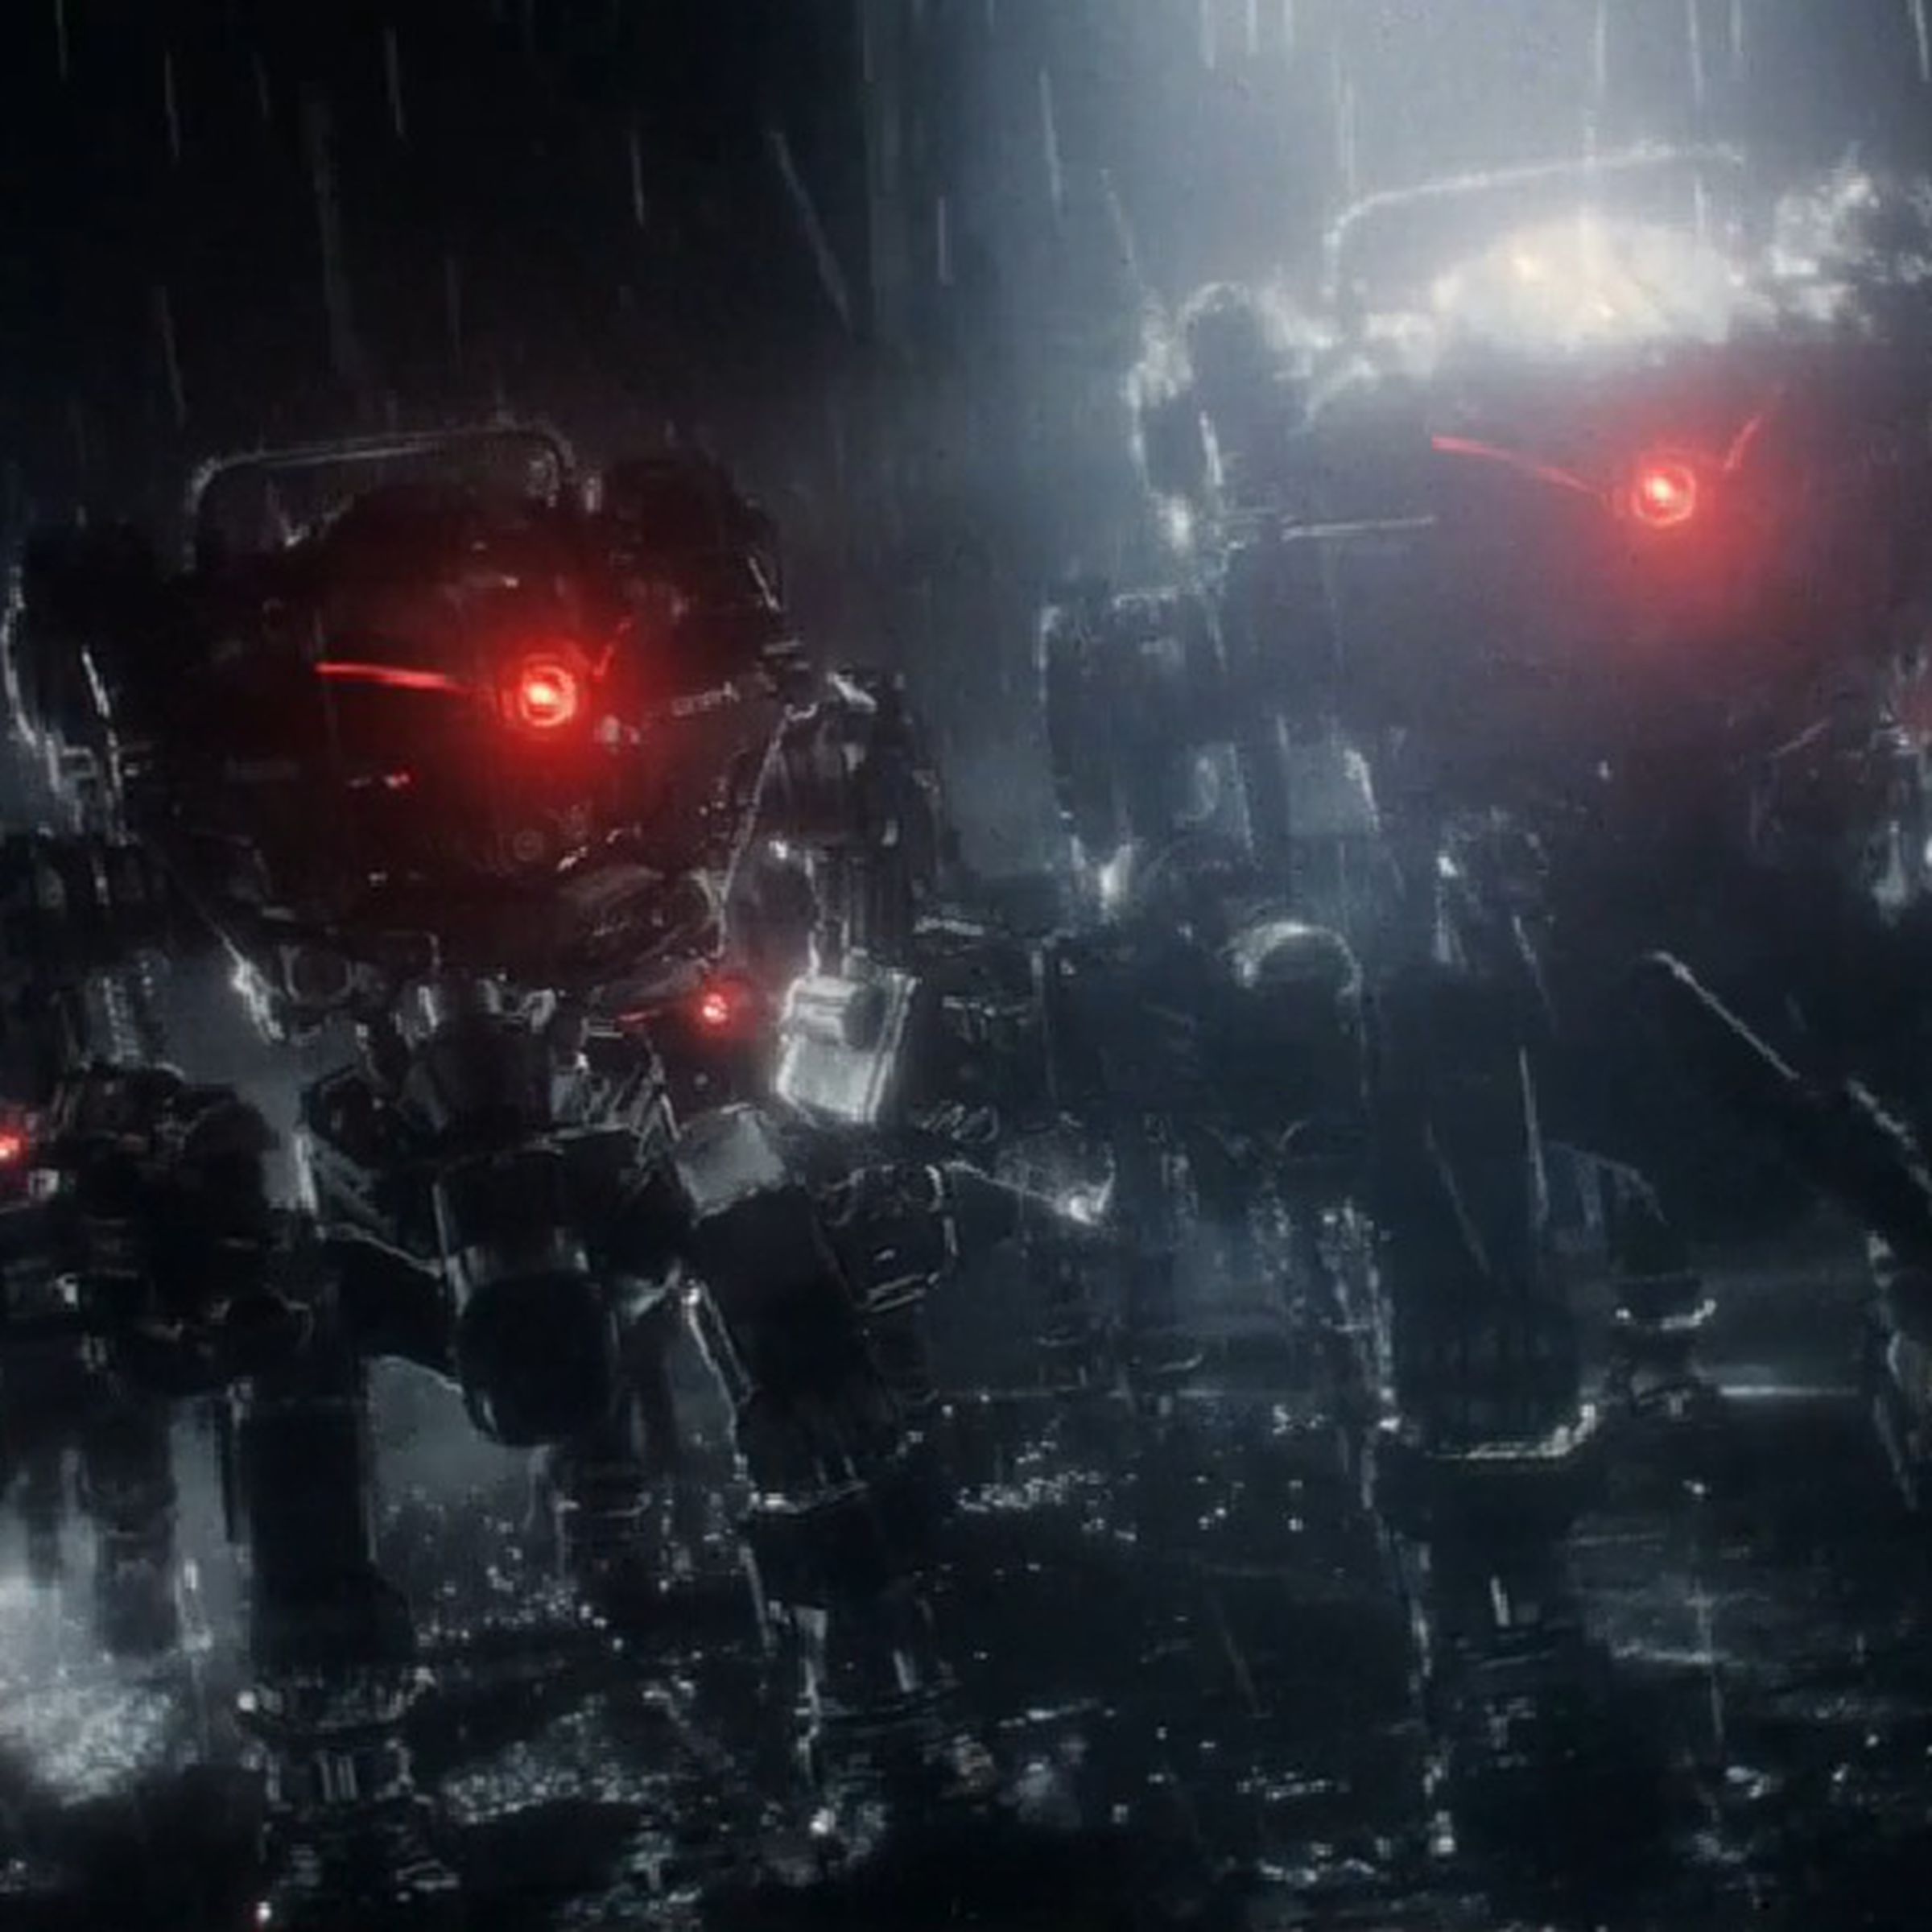 Wolfenstein: The New Order trailer screen cap from 2013 featuring big robot dudes with singe red eyes wrecking stuff in a rainy dark outdoor setting